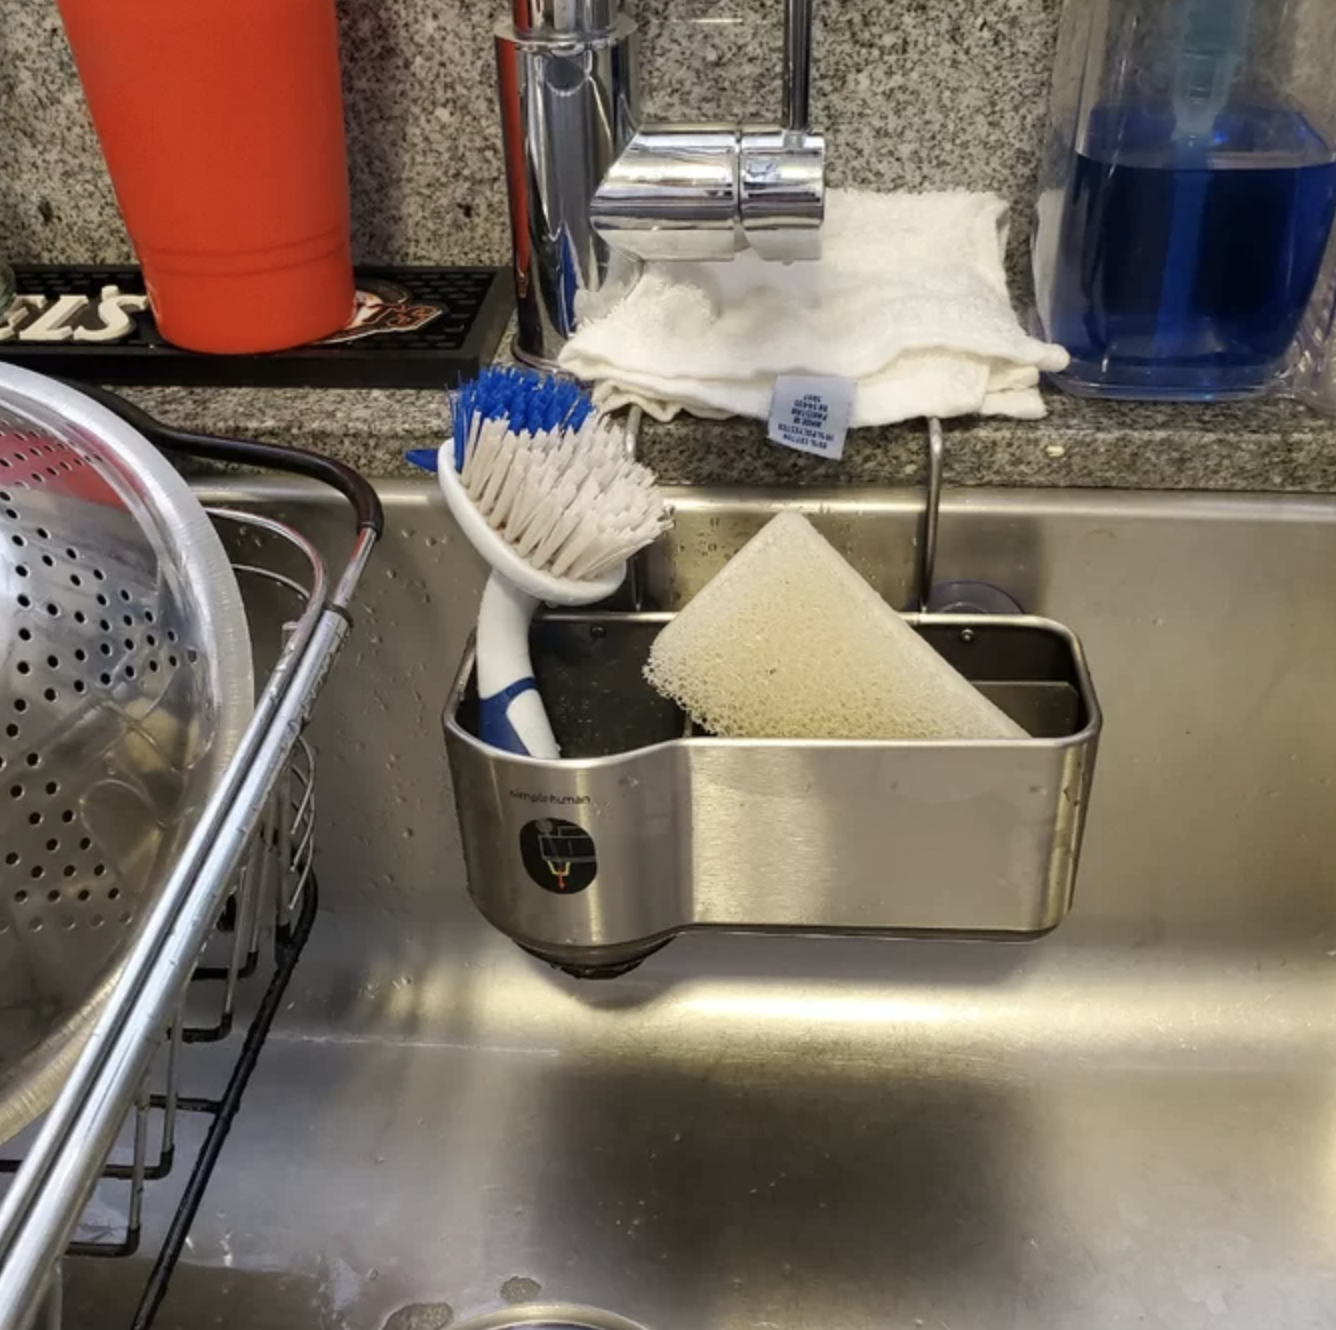 stainless steel sink caddy mounted on the inside of a sink